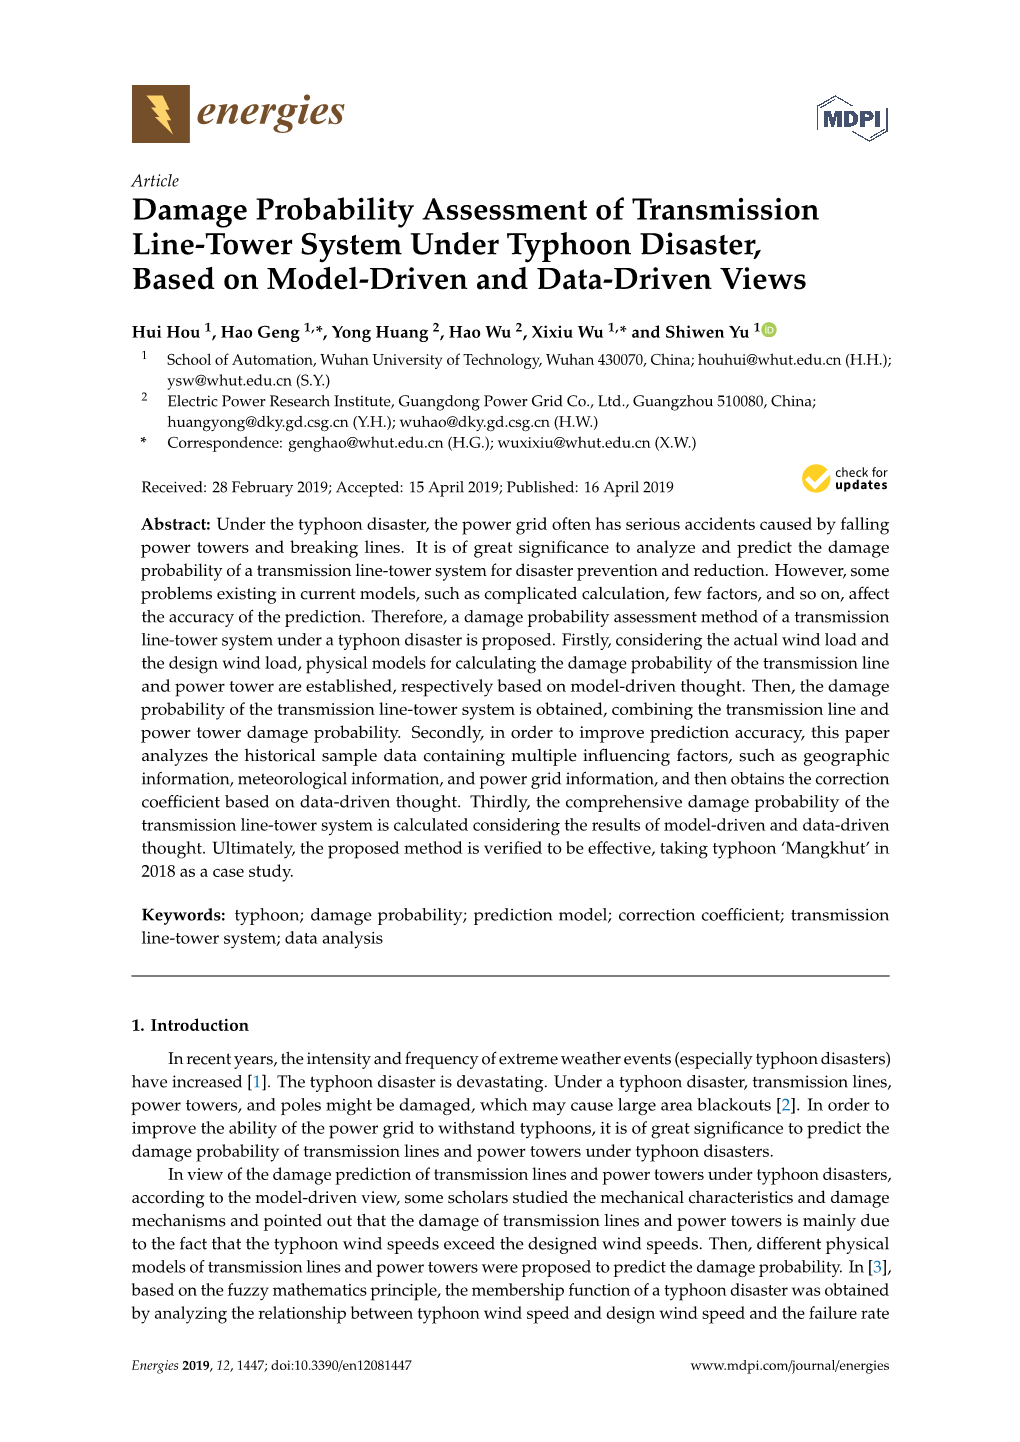 Damage Probability Assessment of Transmission Line-Tower System Under Typhoon Disaster, Based on Model-Driven and Data-Driven Views